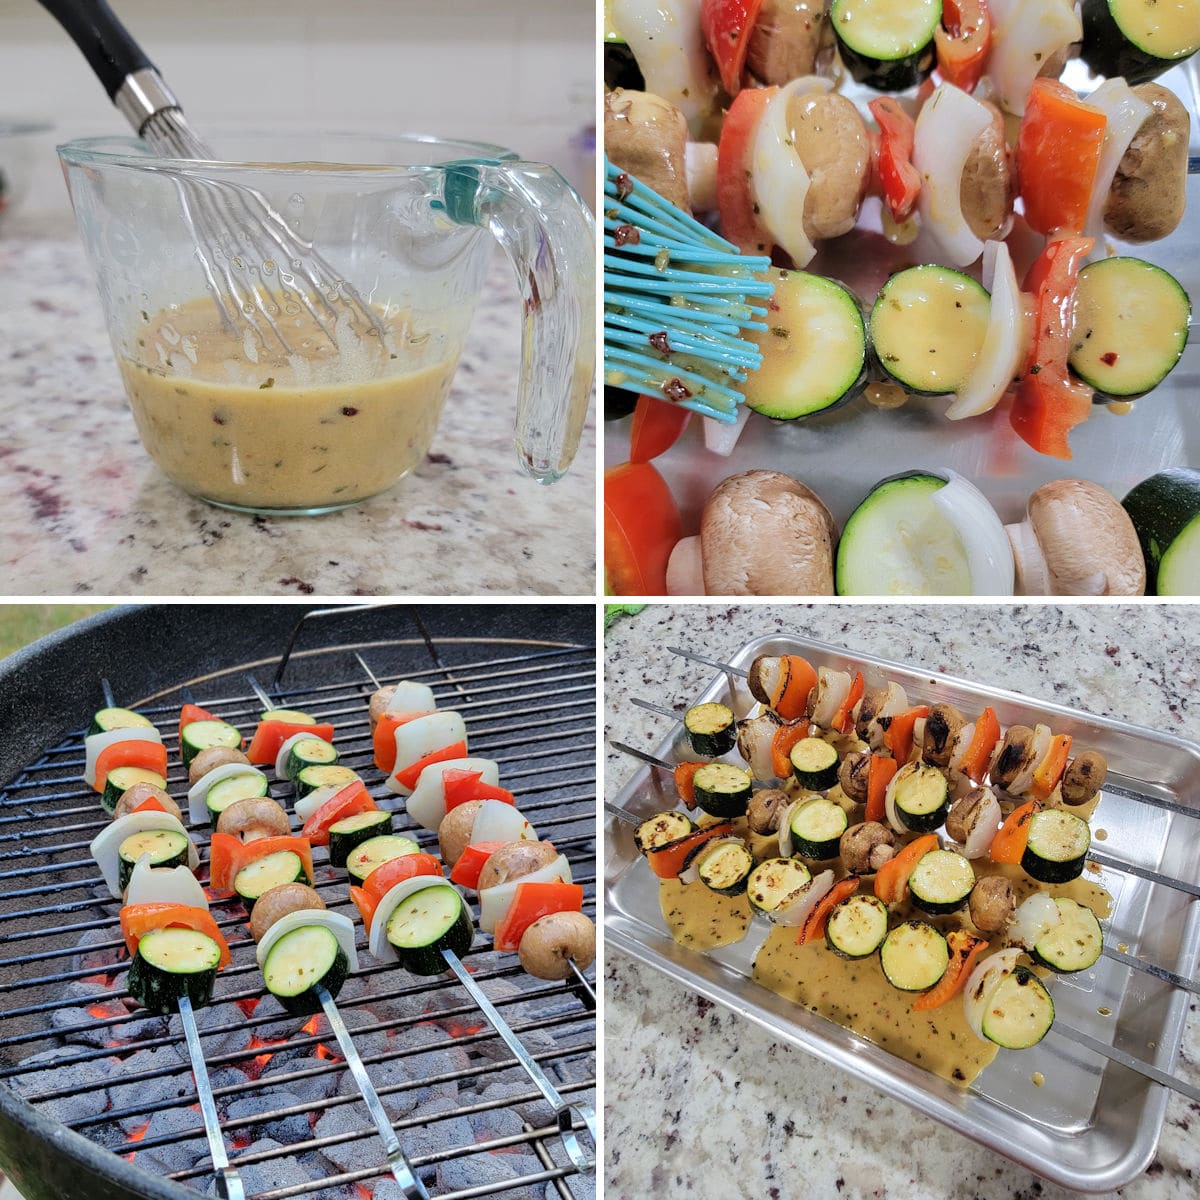 Assembling and grilling vegetable skewers.